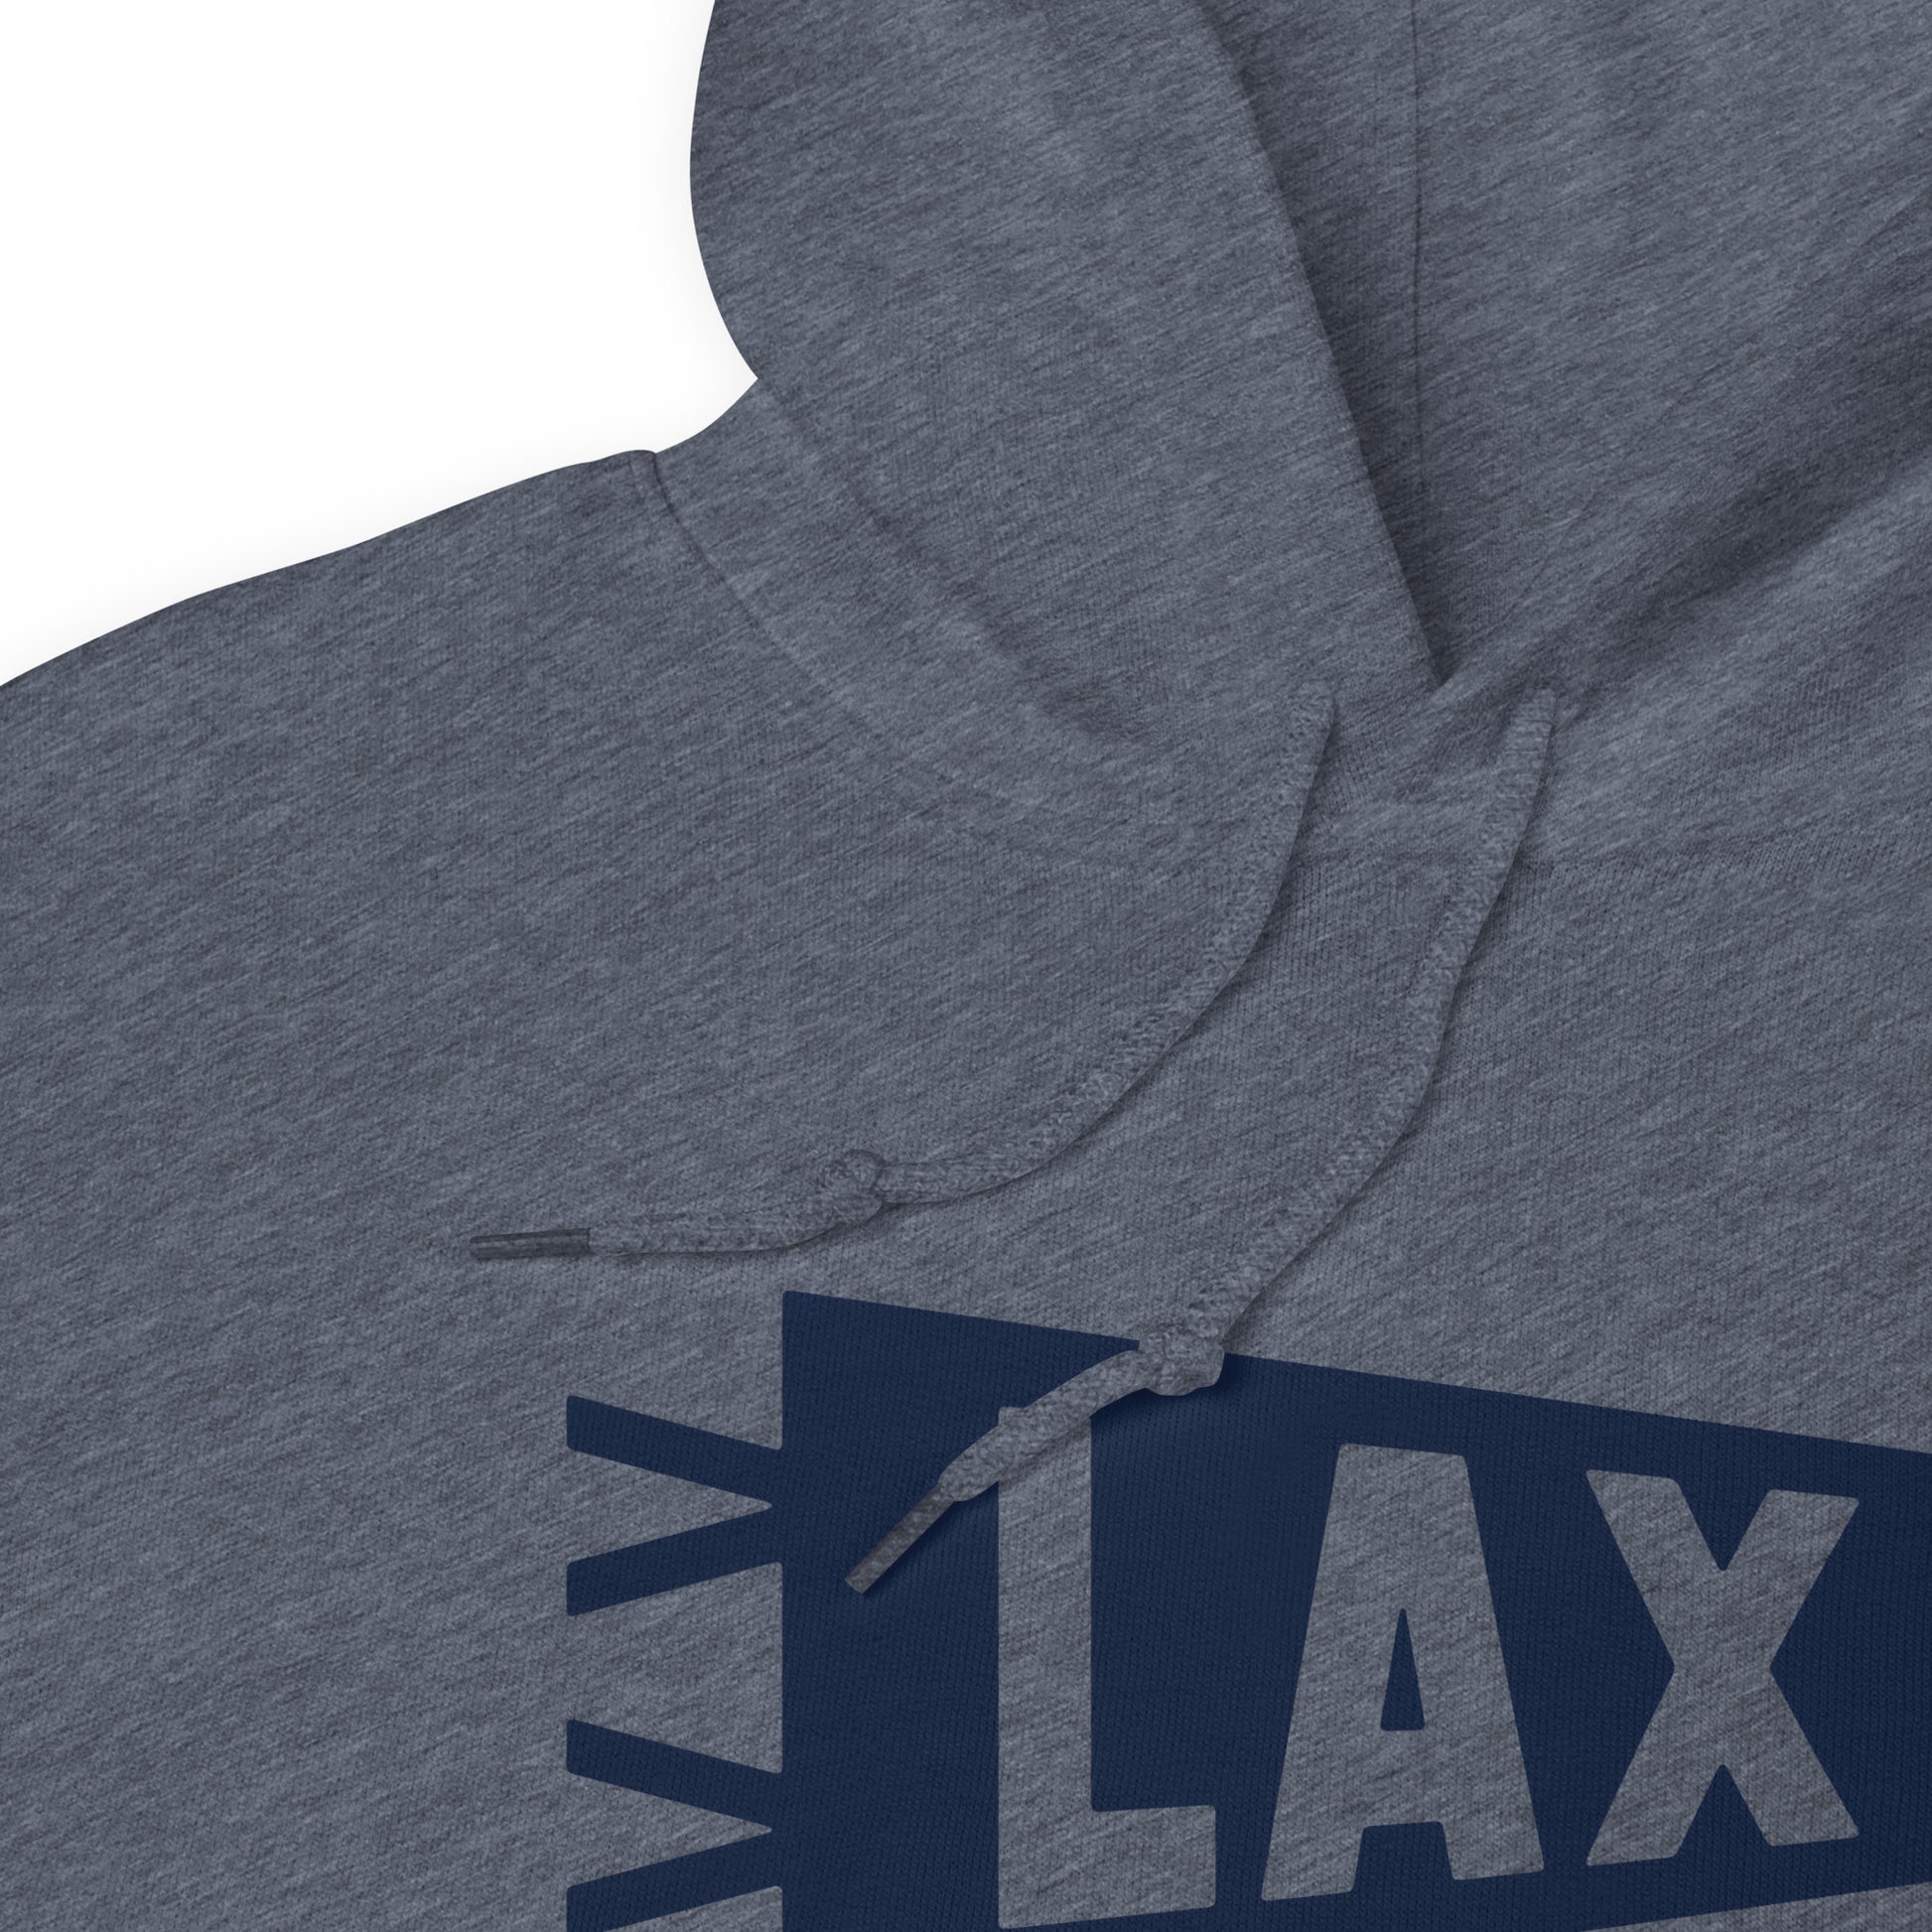 Airport Code Unisex Hoodie - Navy Blue Graphic • LAX Los Angeles • YHM Designs - Image 06